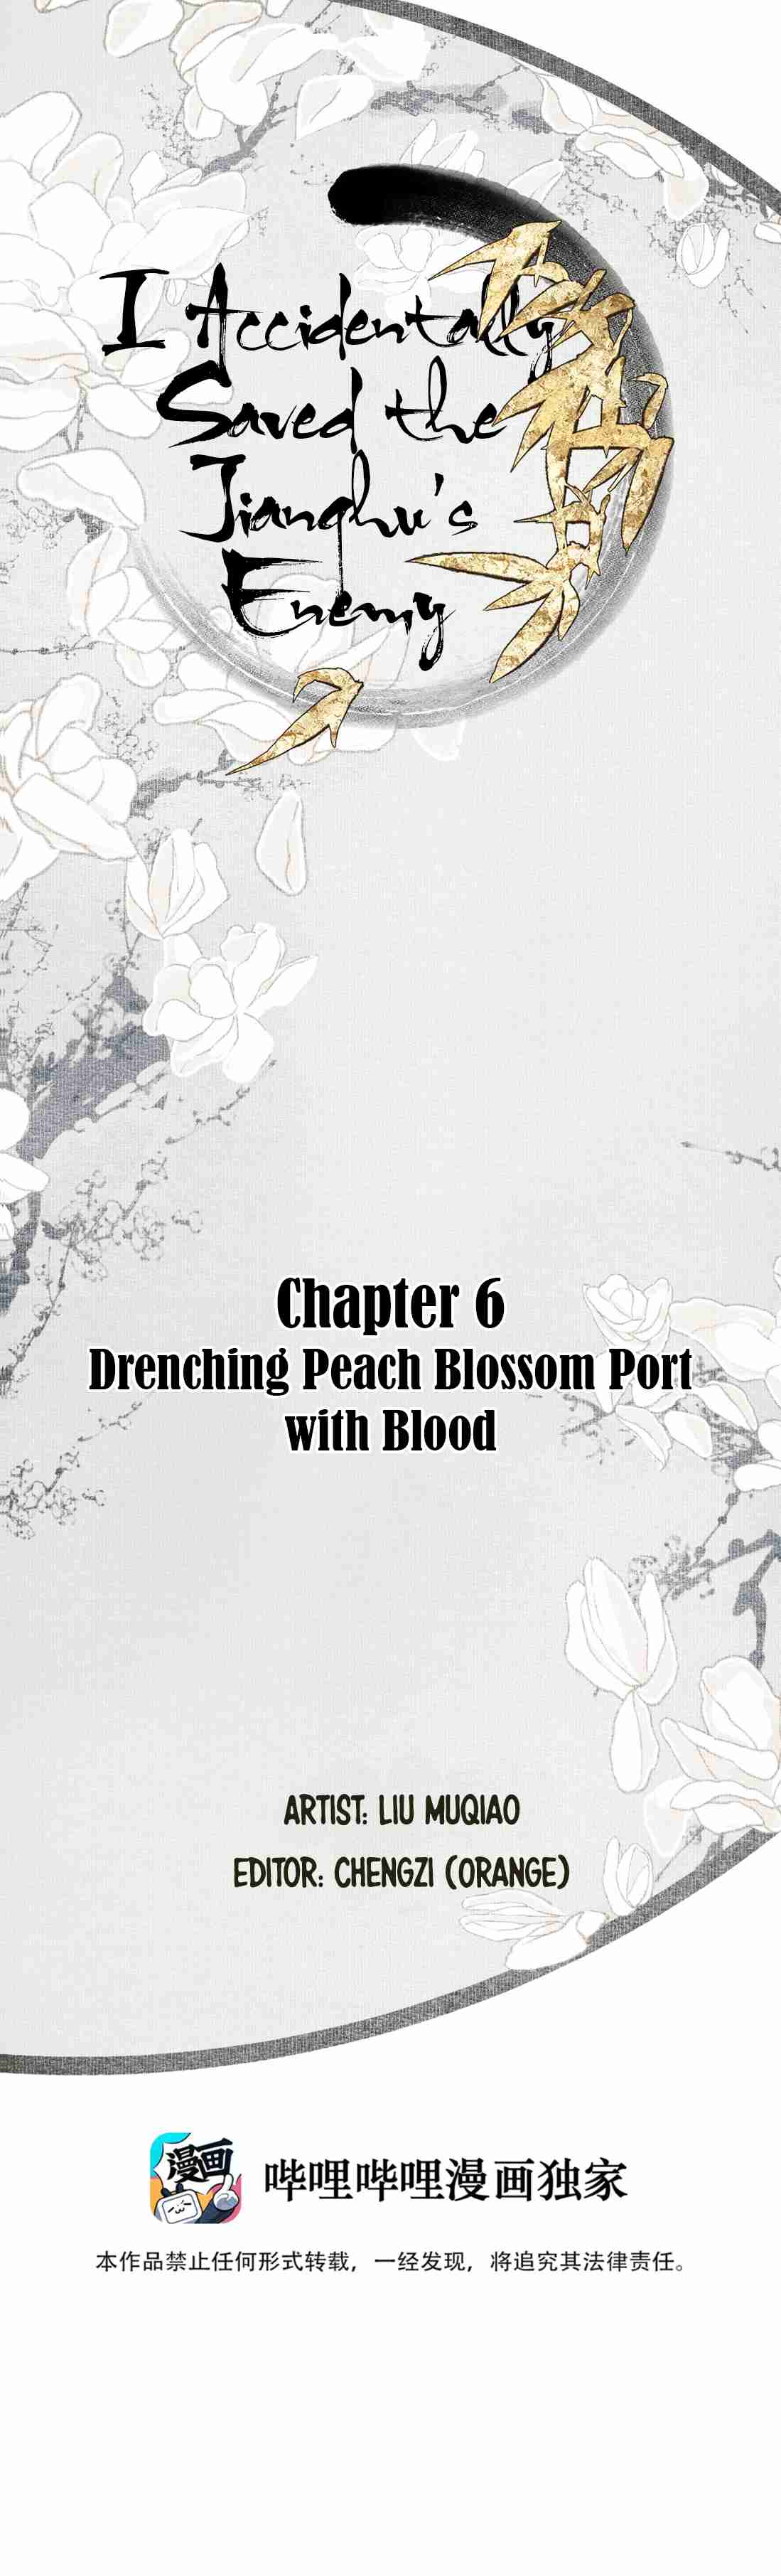 Saved the Public Enemy by Mistake 6 Drenching Peach Blossom Port with Blood